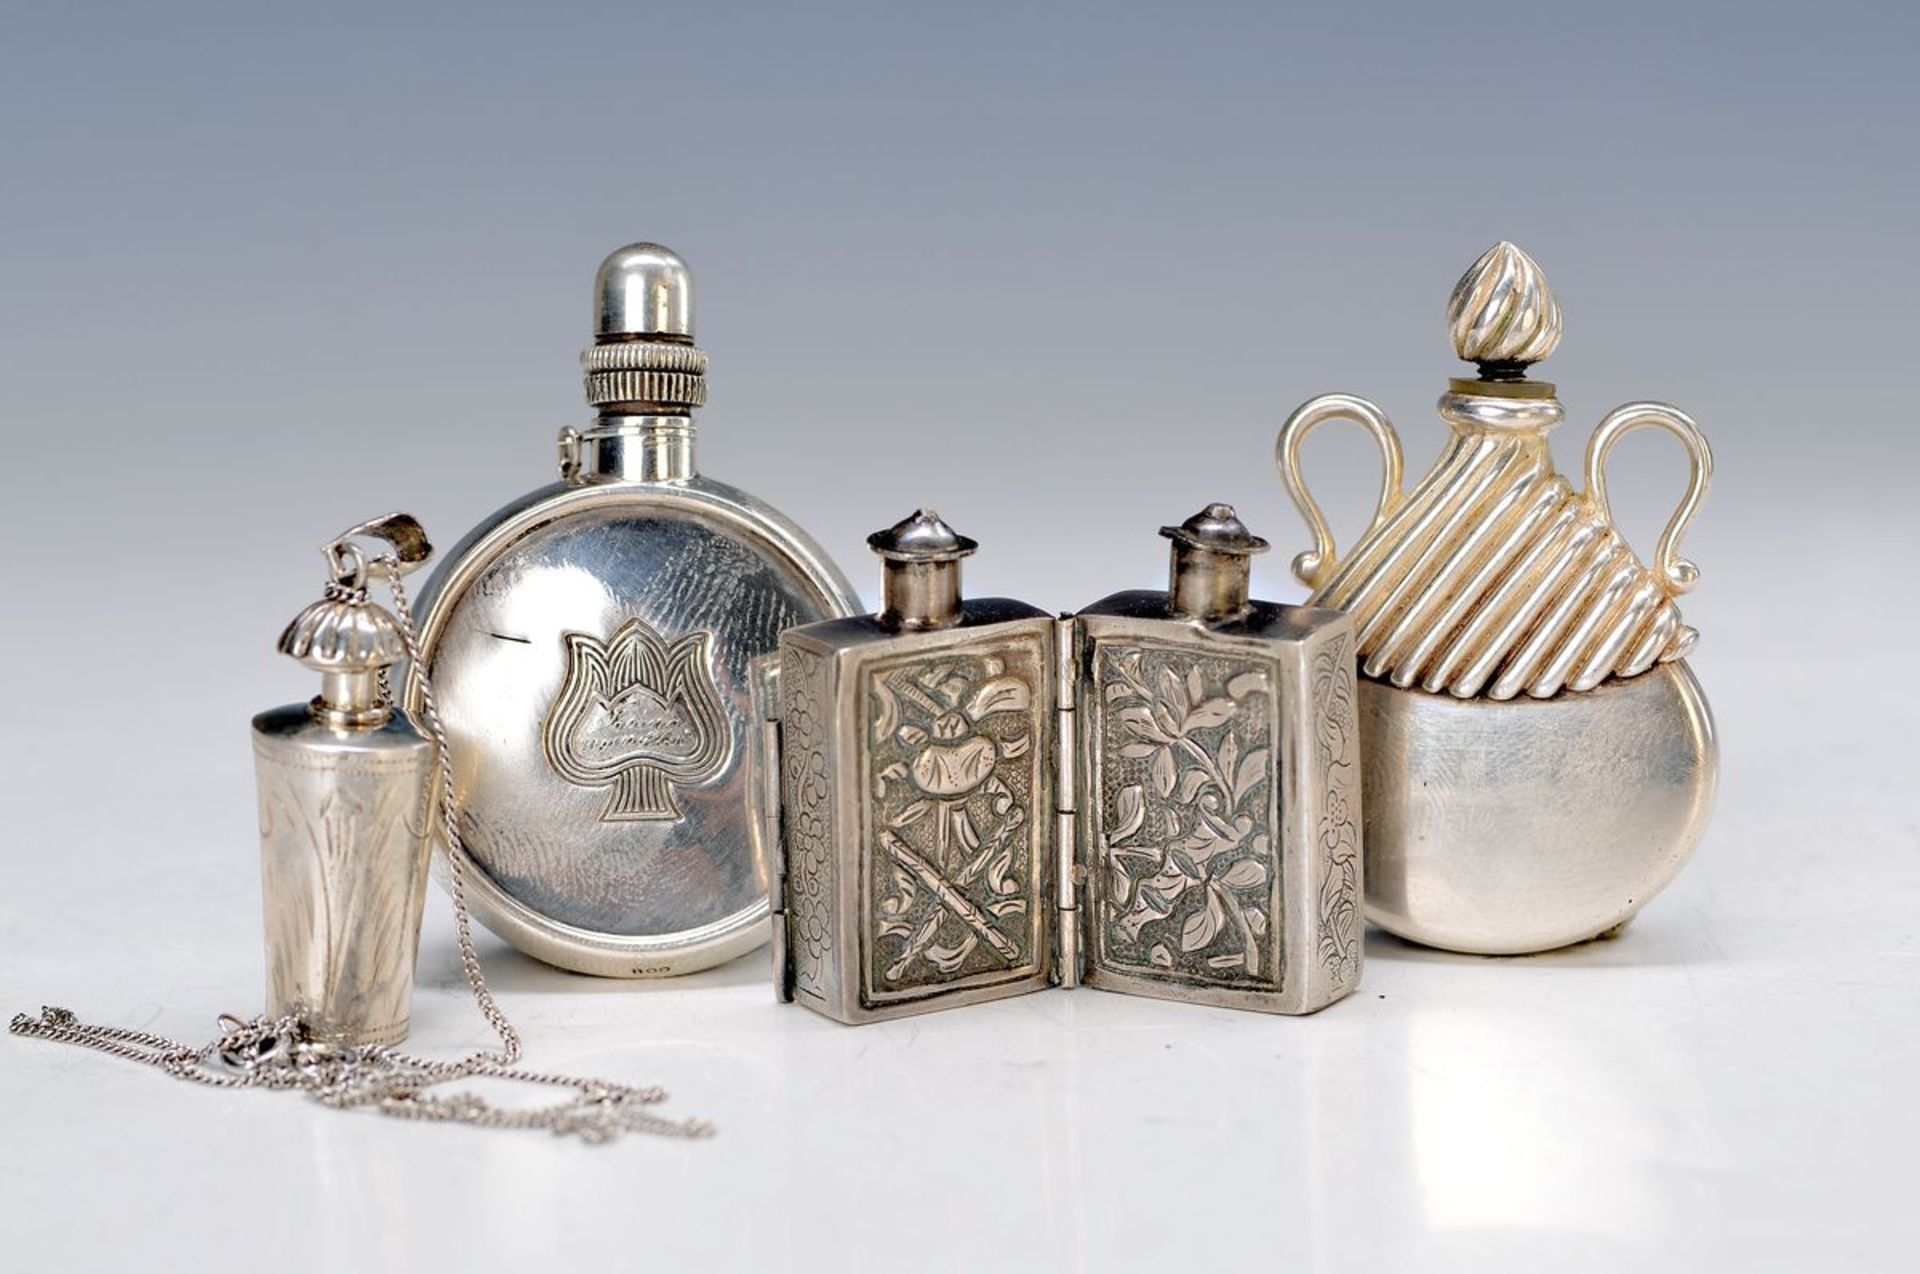 4 snuff bottles, around 1900-1930, silver, 1 off 925 Sterling silver, species-Deco decor, 5.5cm; one